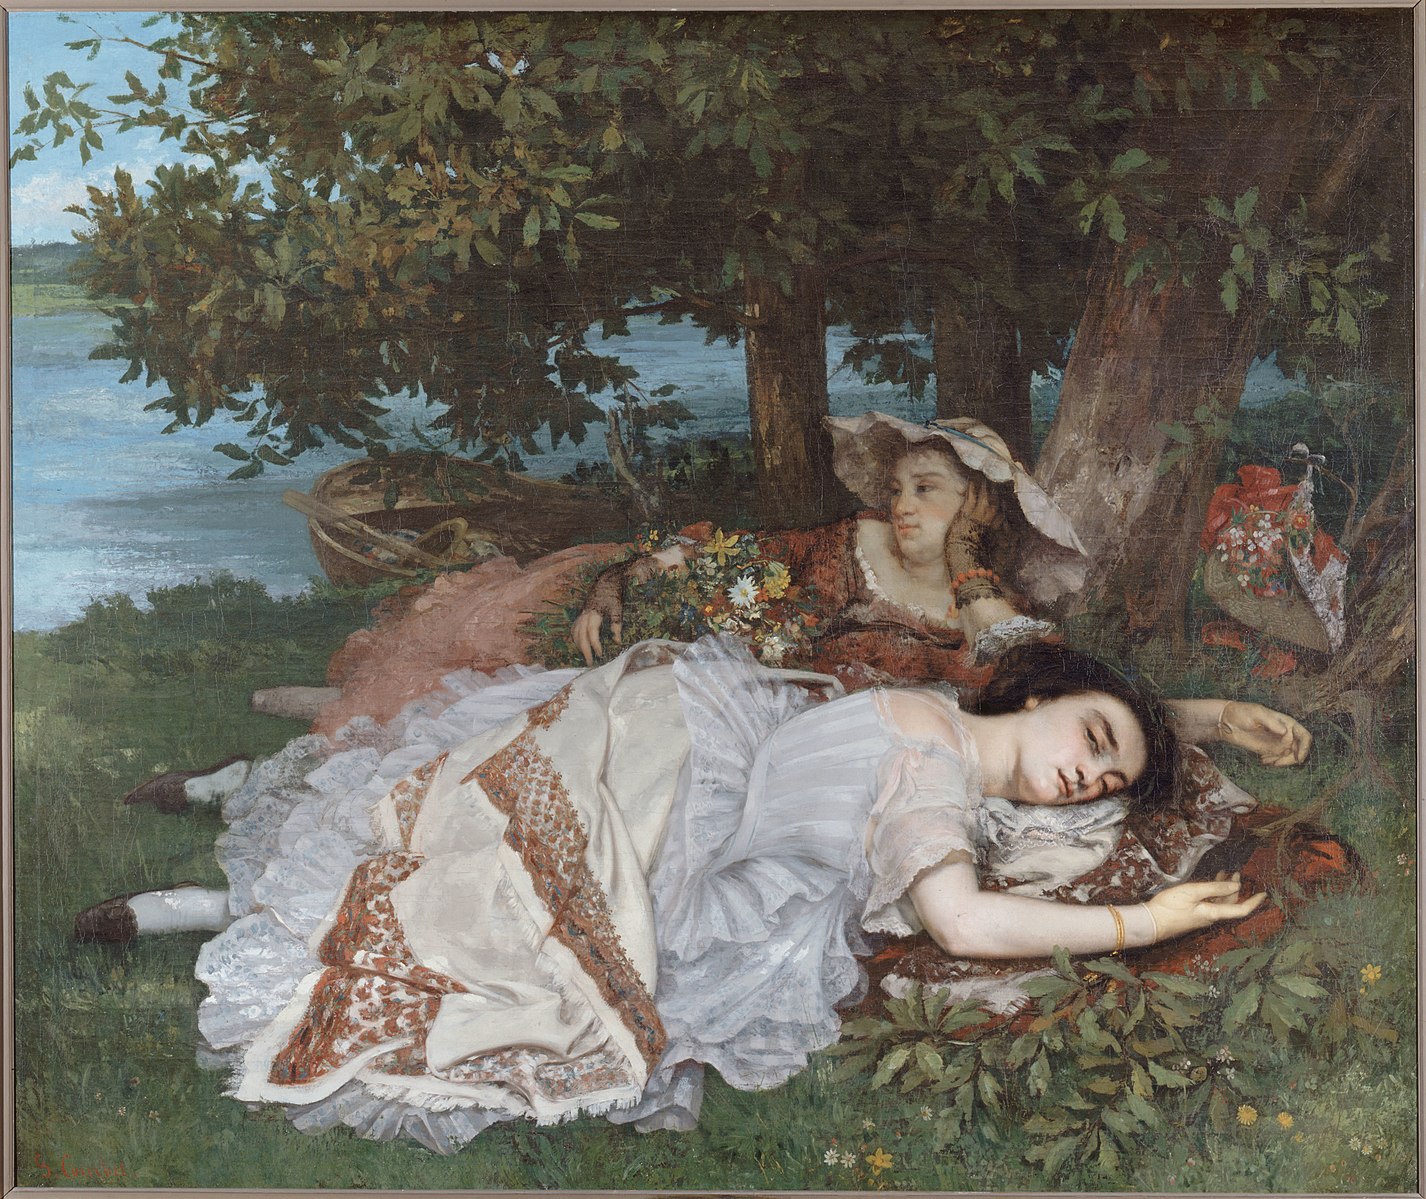 Two women laying on a blanket under a tree next to a lake